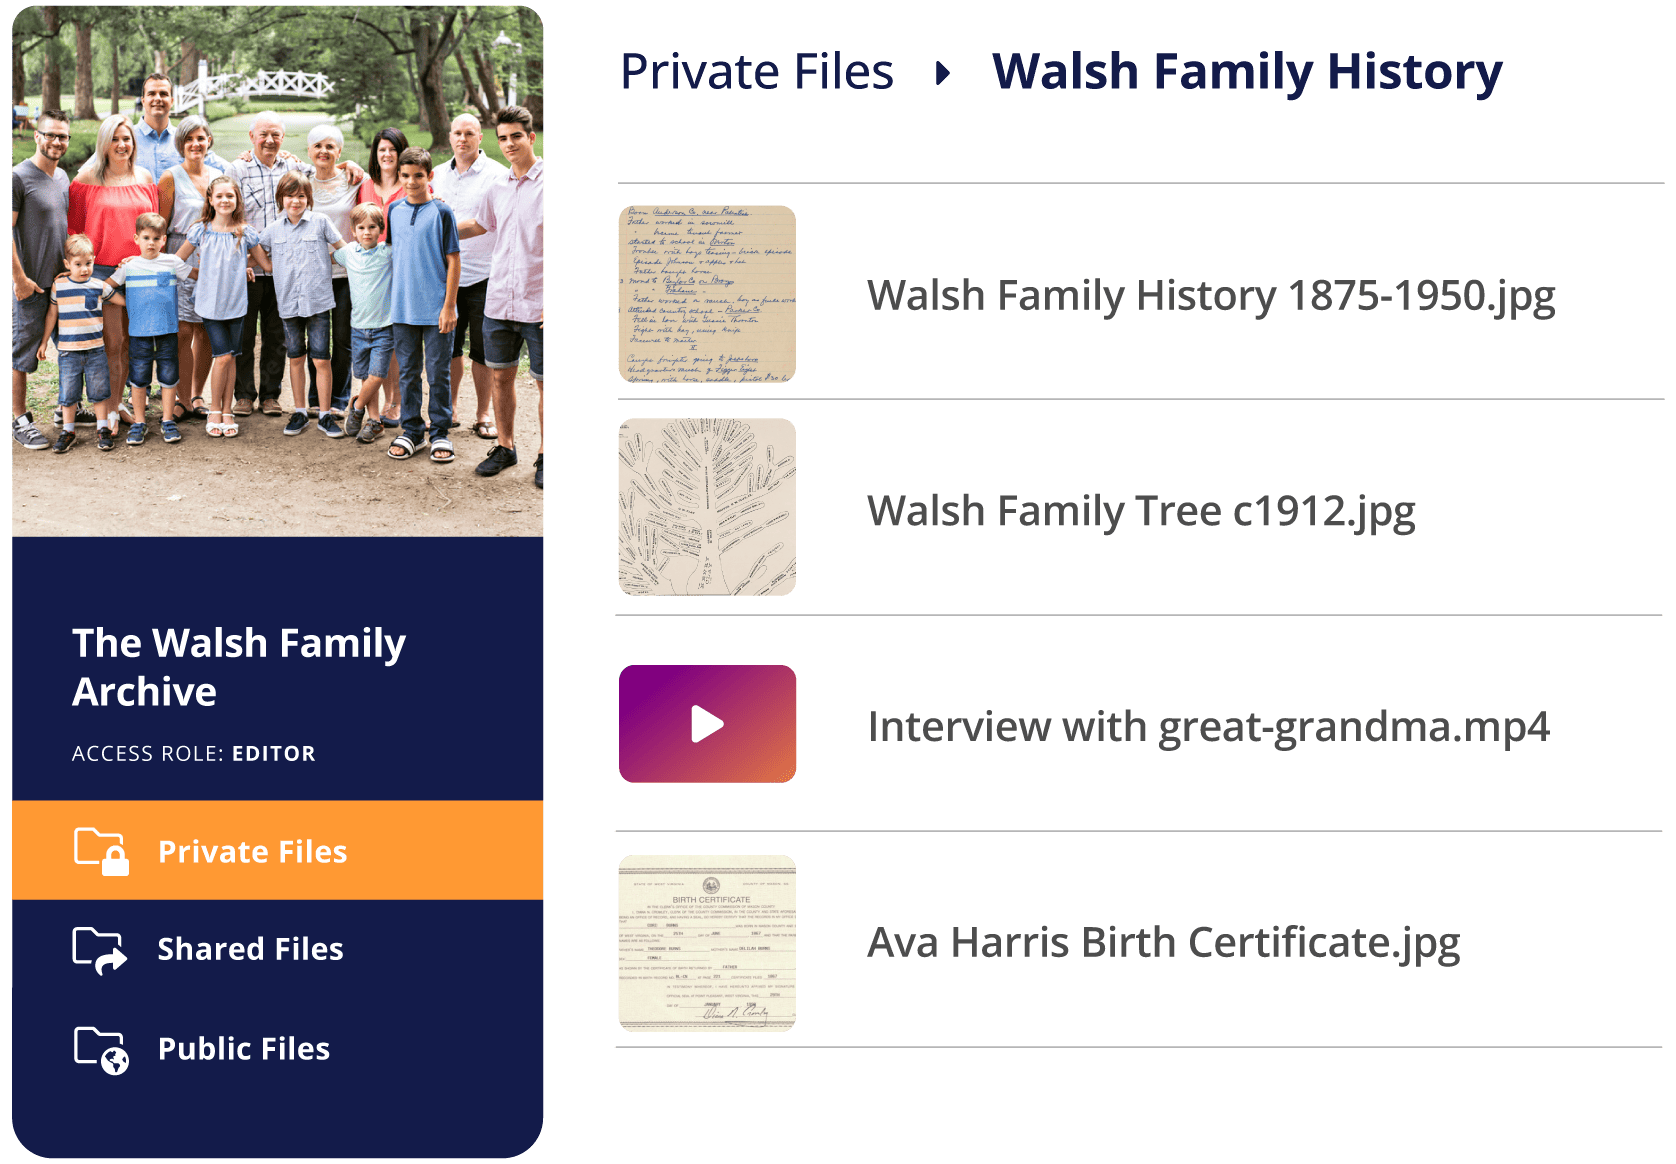 Privately shared family history files